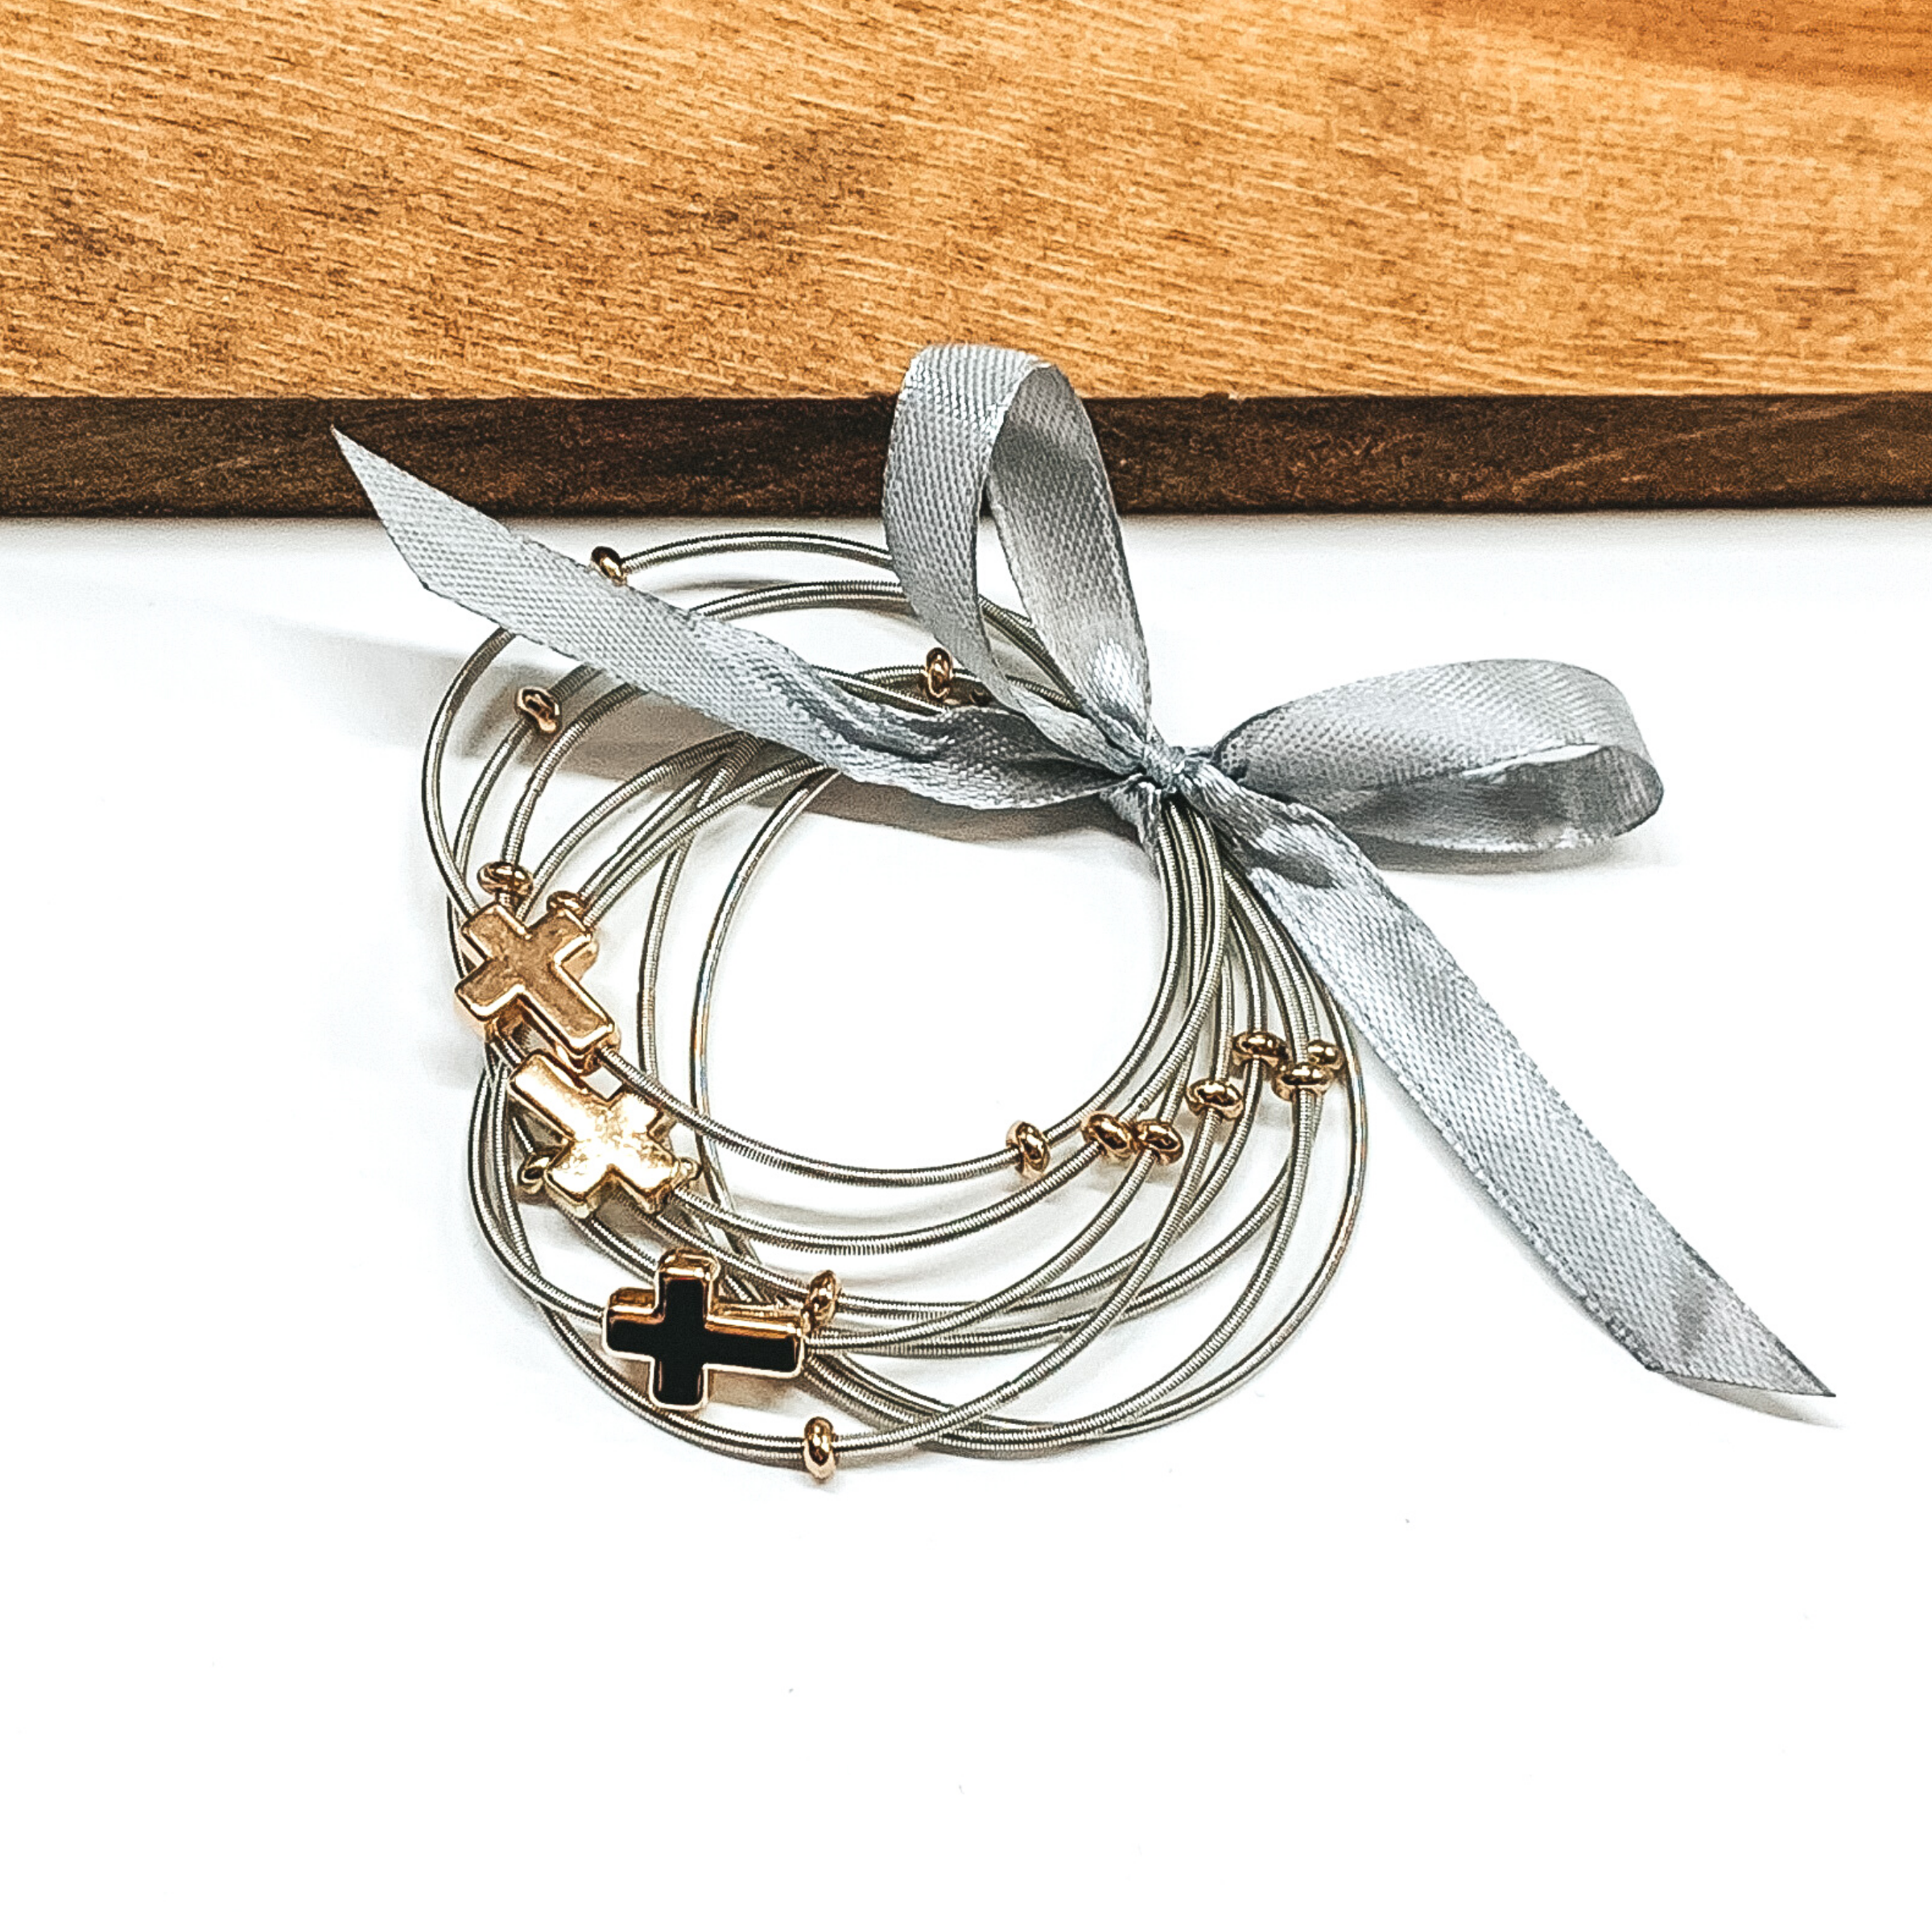 Group of silver spring wire elastic bracelet set tied together with a silver ribbon that is tied in a bow. Some of the bracelets has small gold ball beads and three bracelets have a single gold cross charm. This bracelet set is pictured laying next to a piece of wood on a white background.